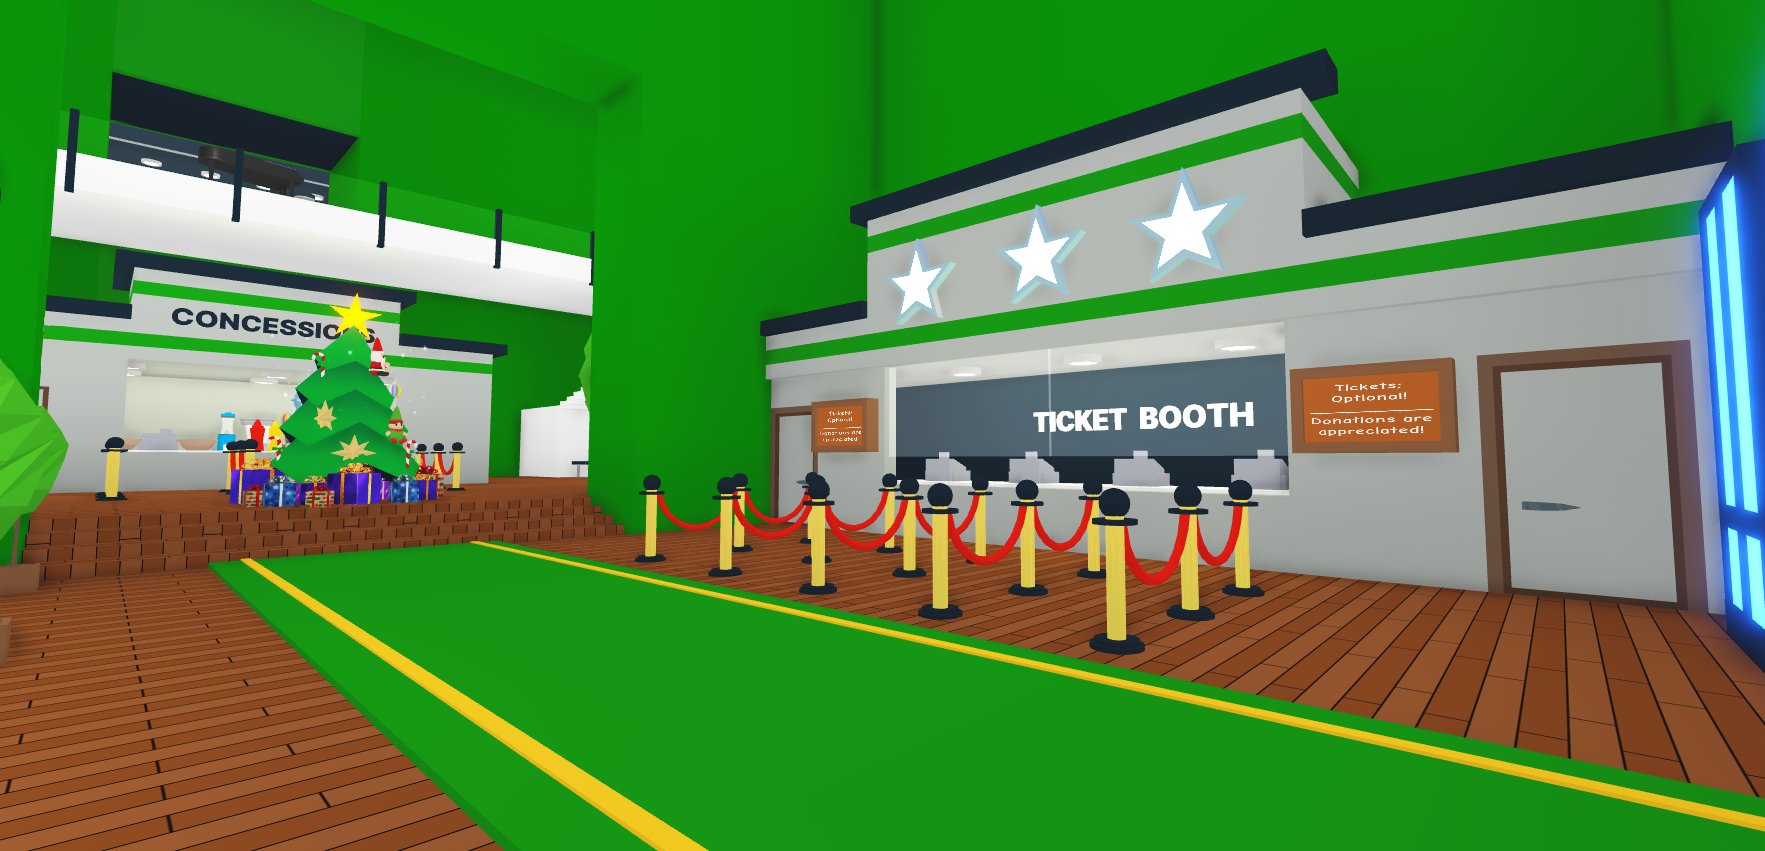 Froggyhopz On Twitter I Ve Been Trying My Hand At Detailed Building In Playadoptme Recently And Wanted To Share This Is My Custom Theater Built Inside Of The Hollywood House It Features A - ticket booth roblox